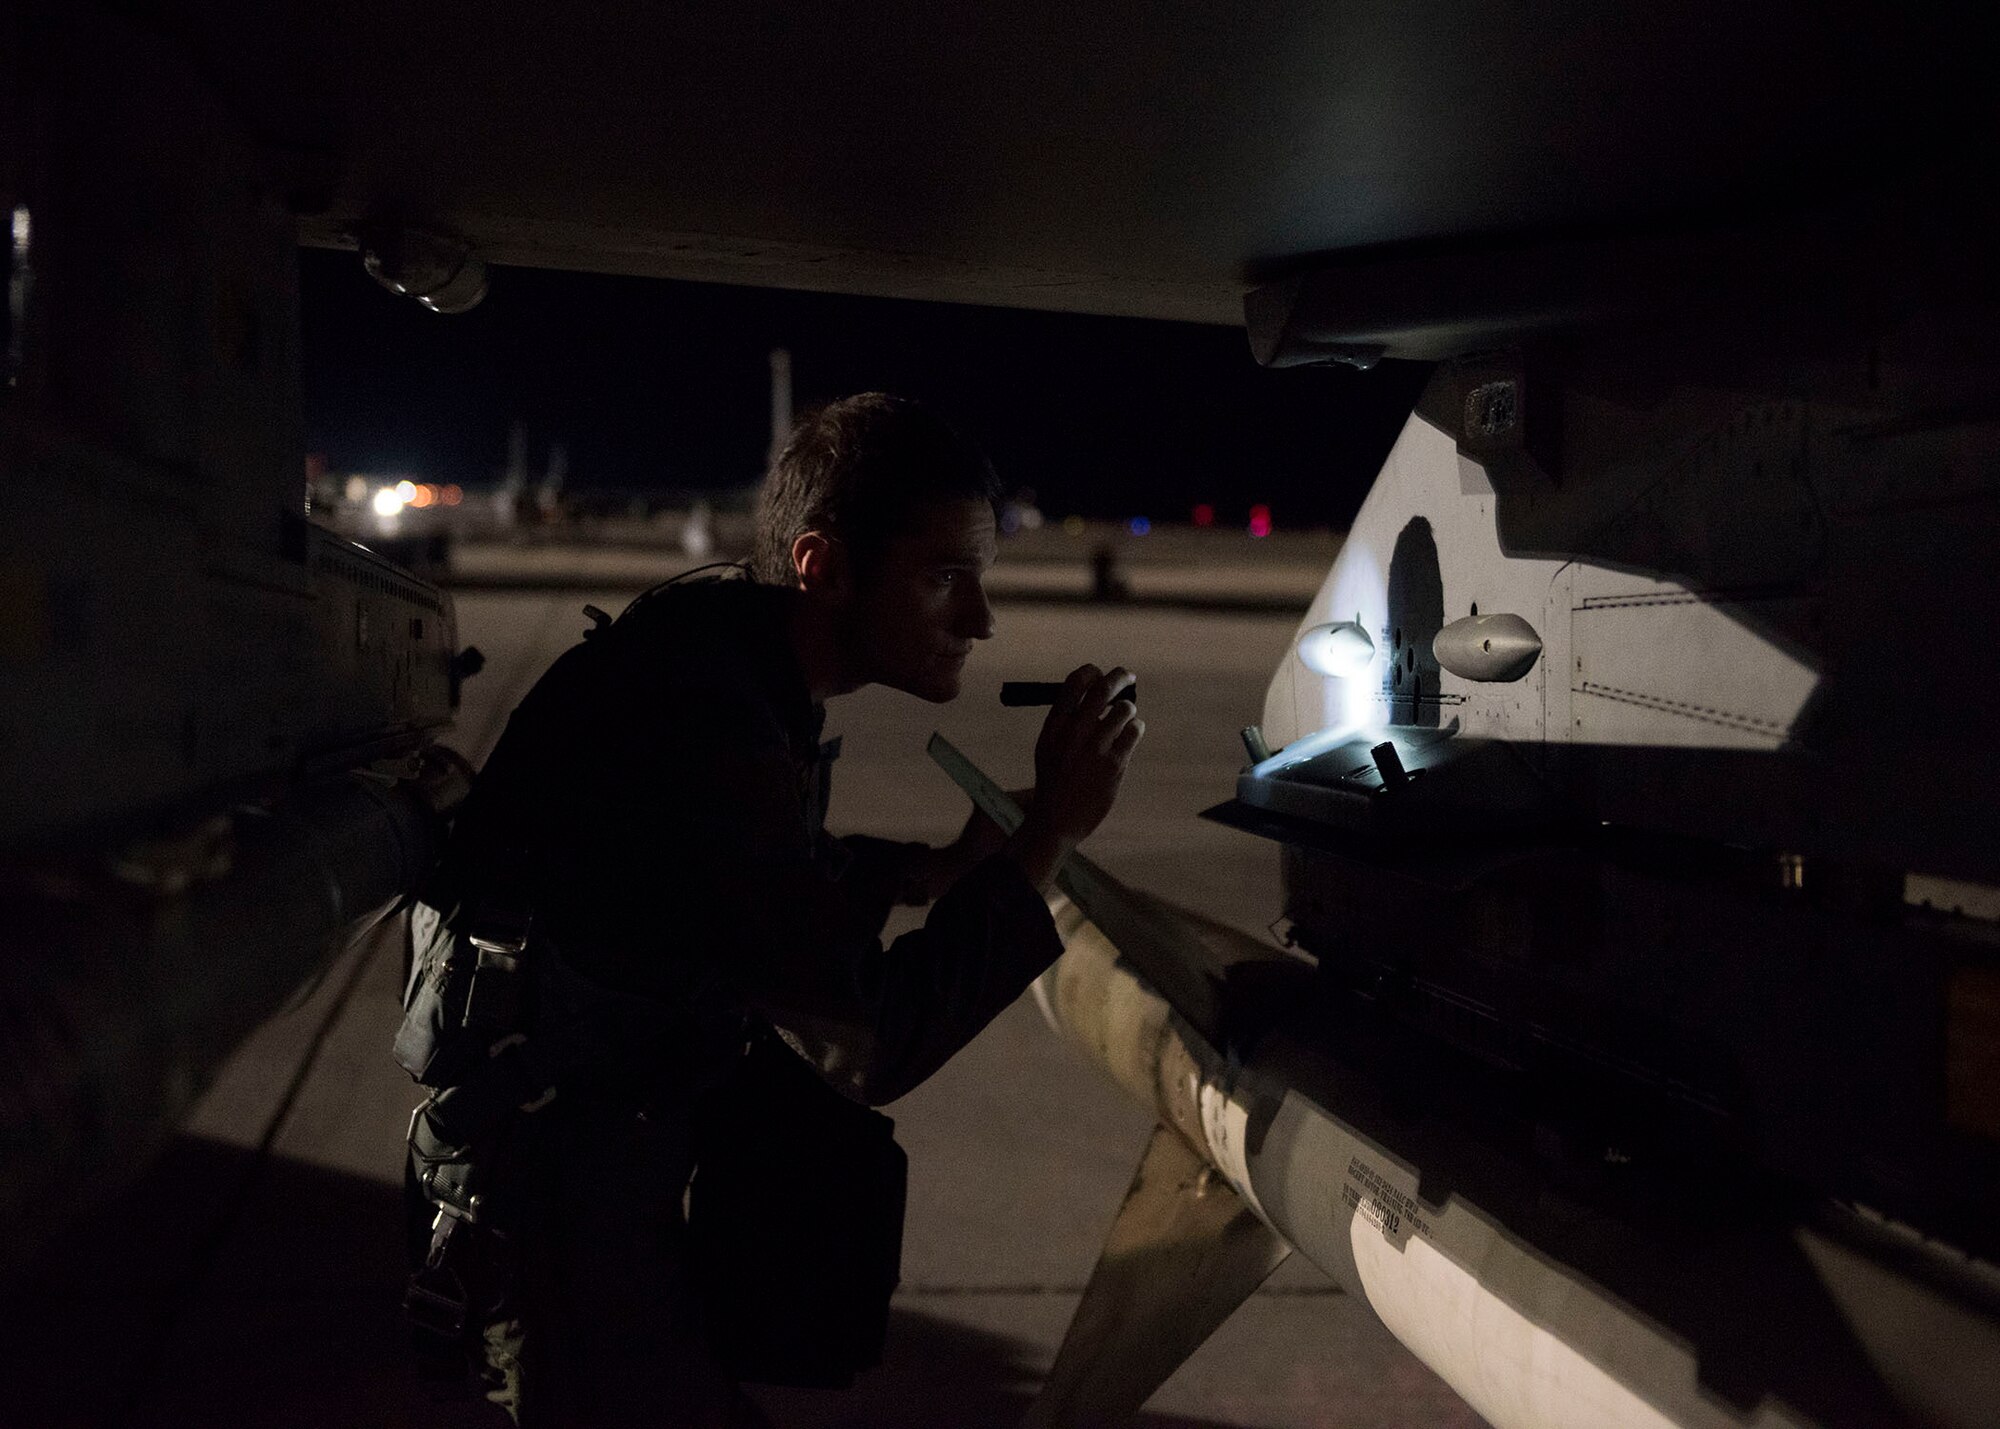 A pilot uses a flashlight to inspect the wing of an F-16 Fighting Falcon fighter jet.